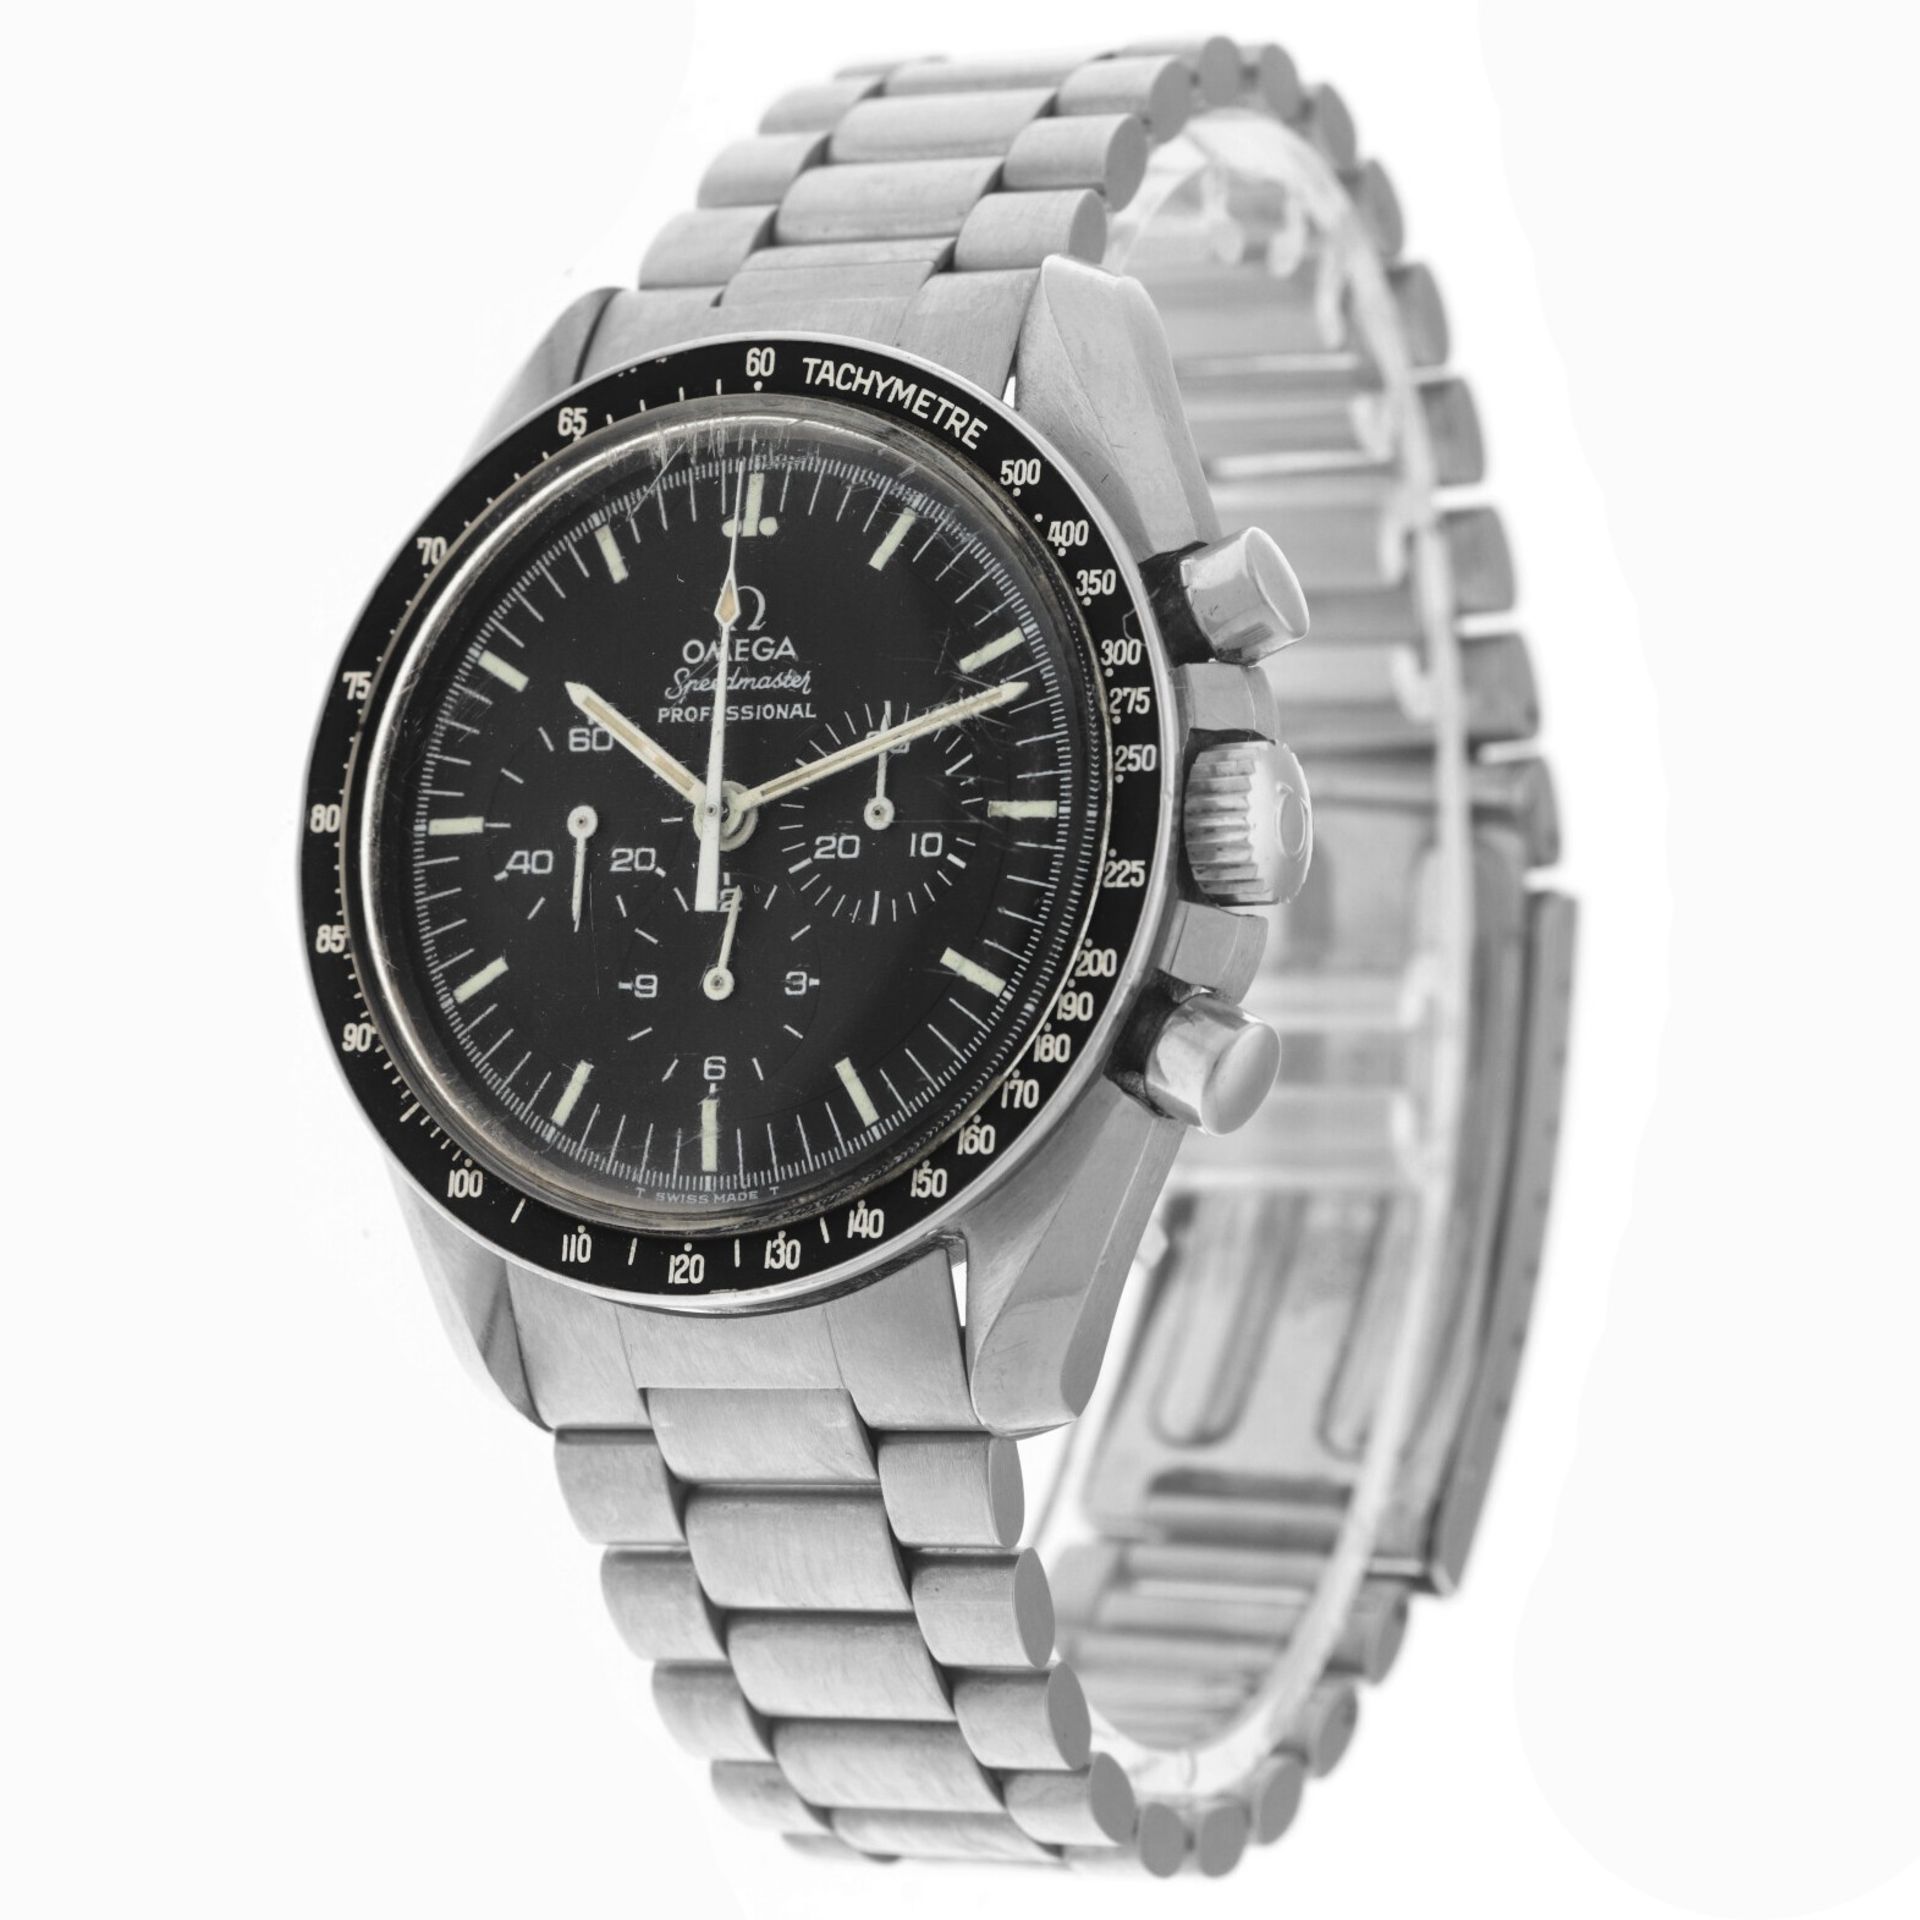 Omega Speedmaster Professional 145.022 - Men's watch - approx. 1971 - Image 2 of 5